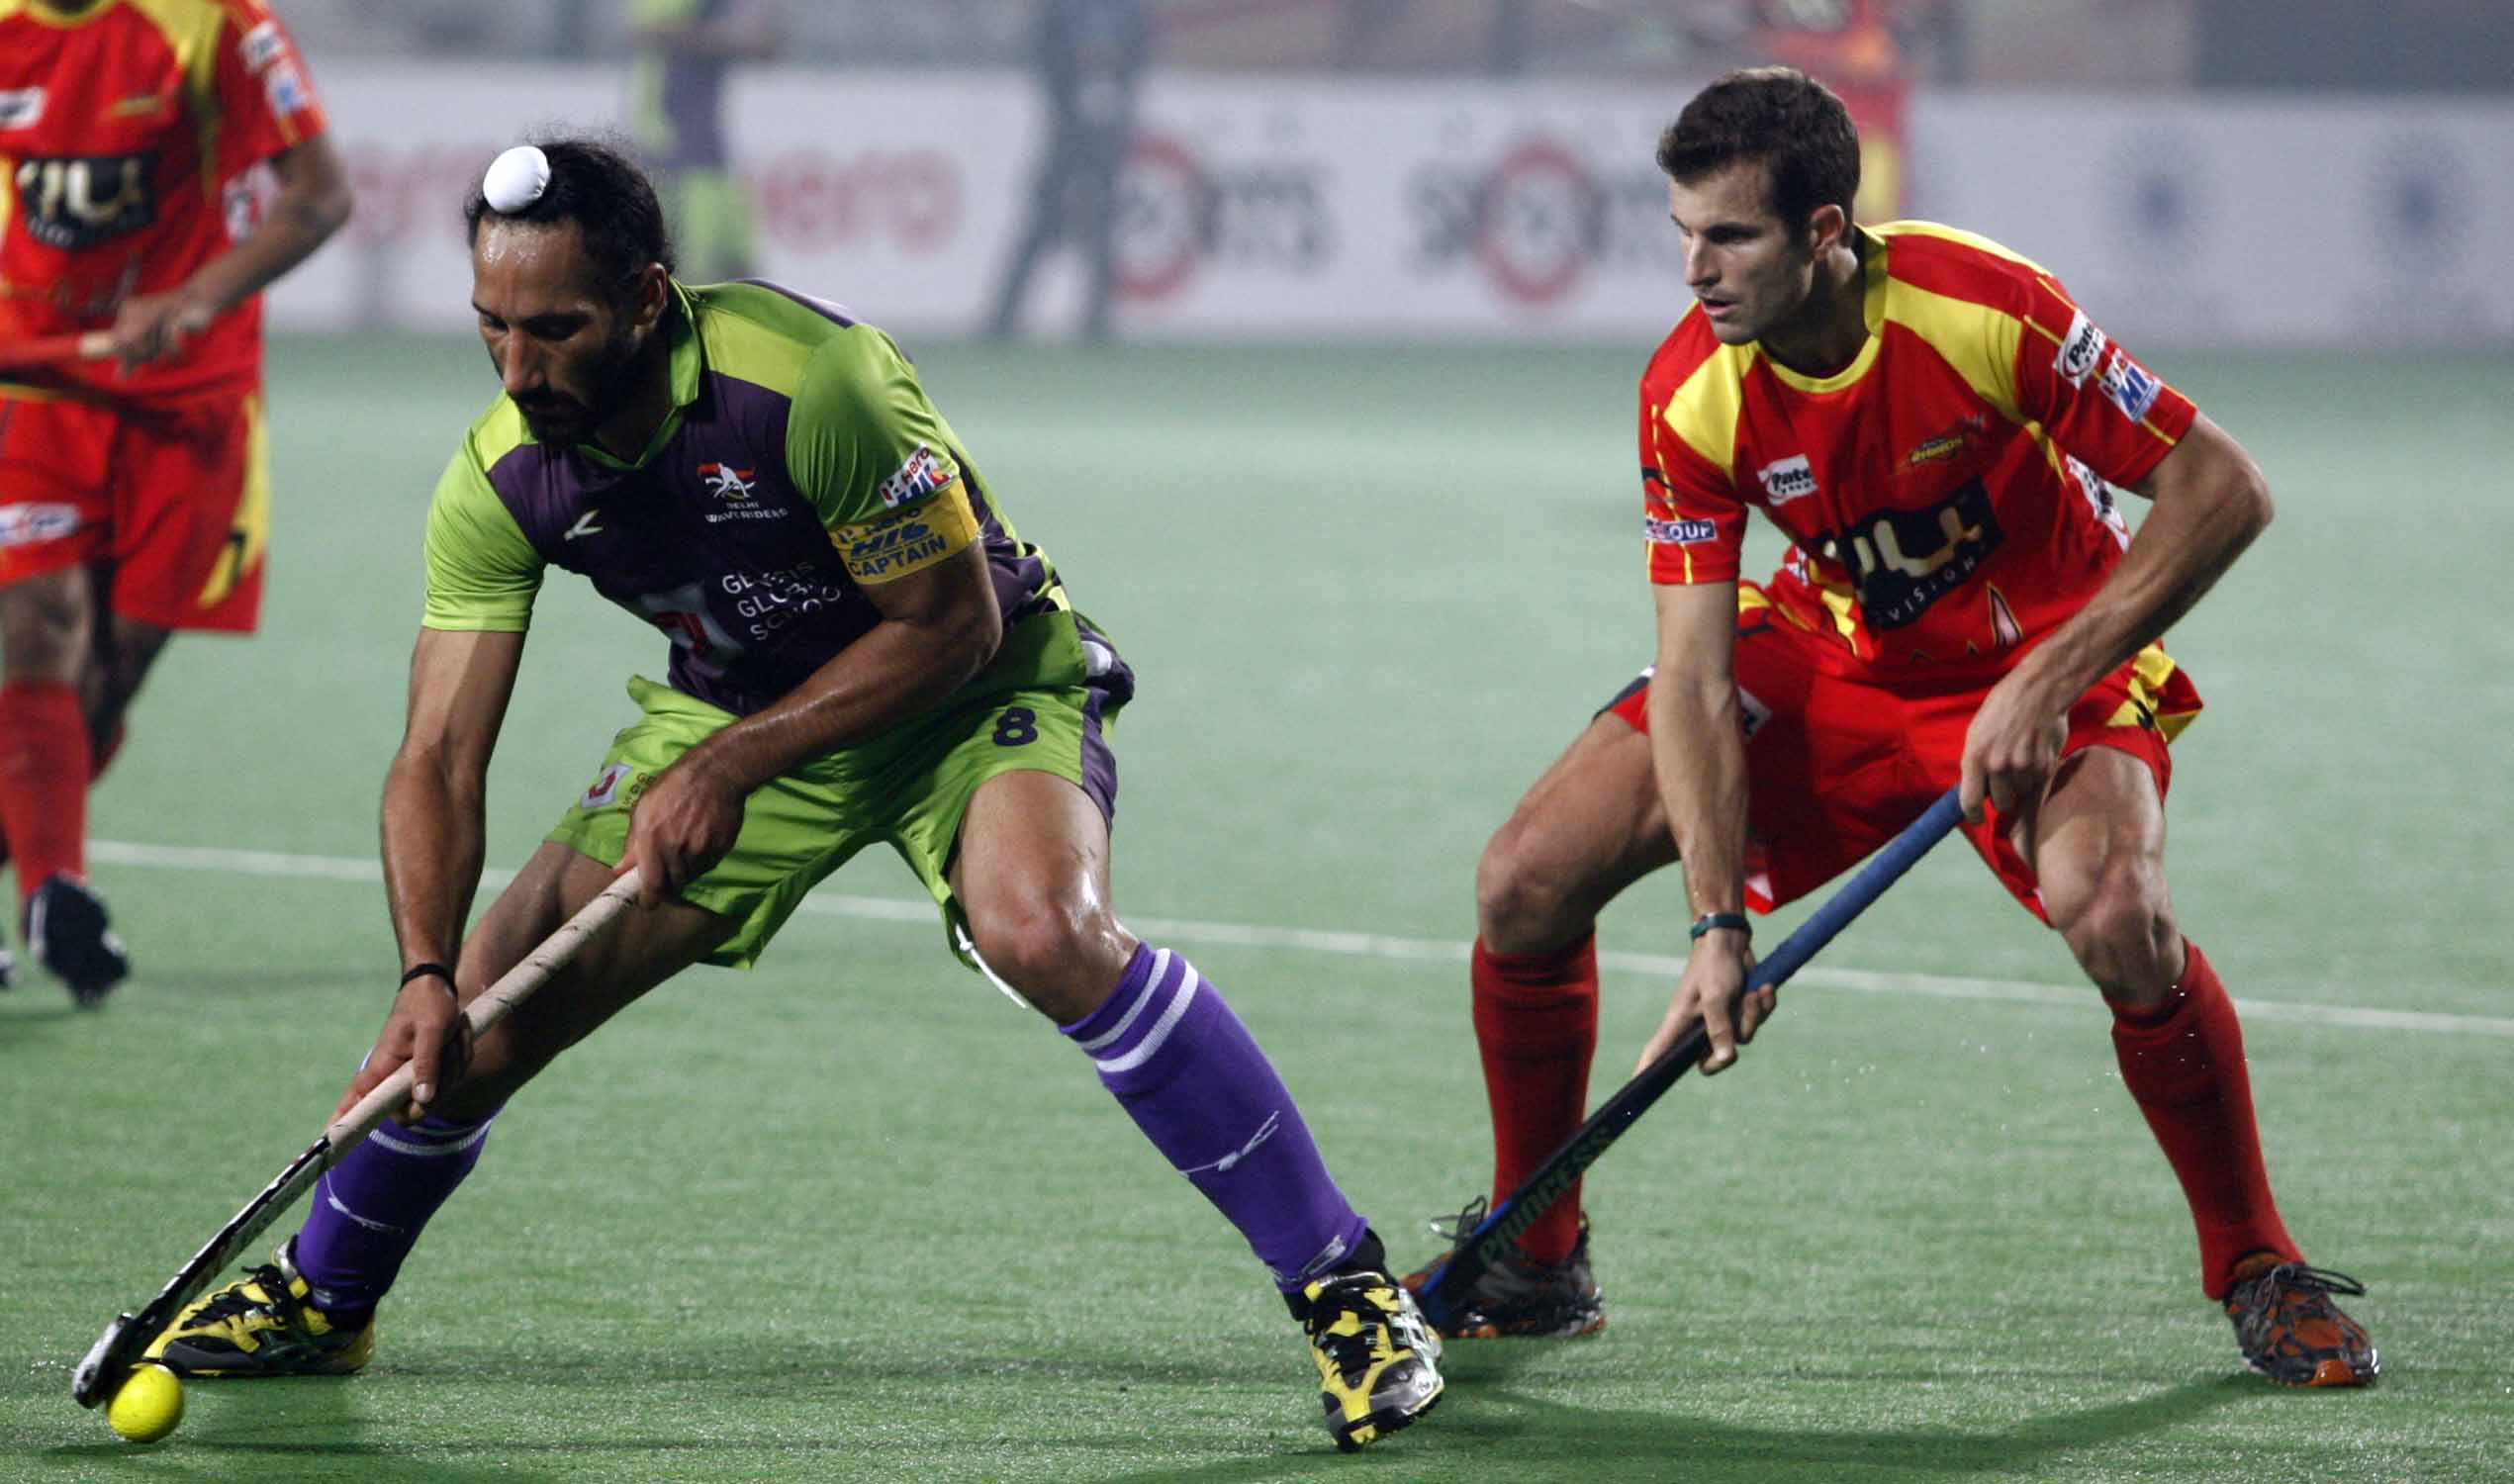 sardar-singh-in-action-during-the-match-1255756-1423719384